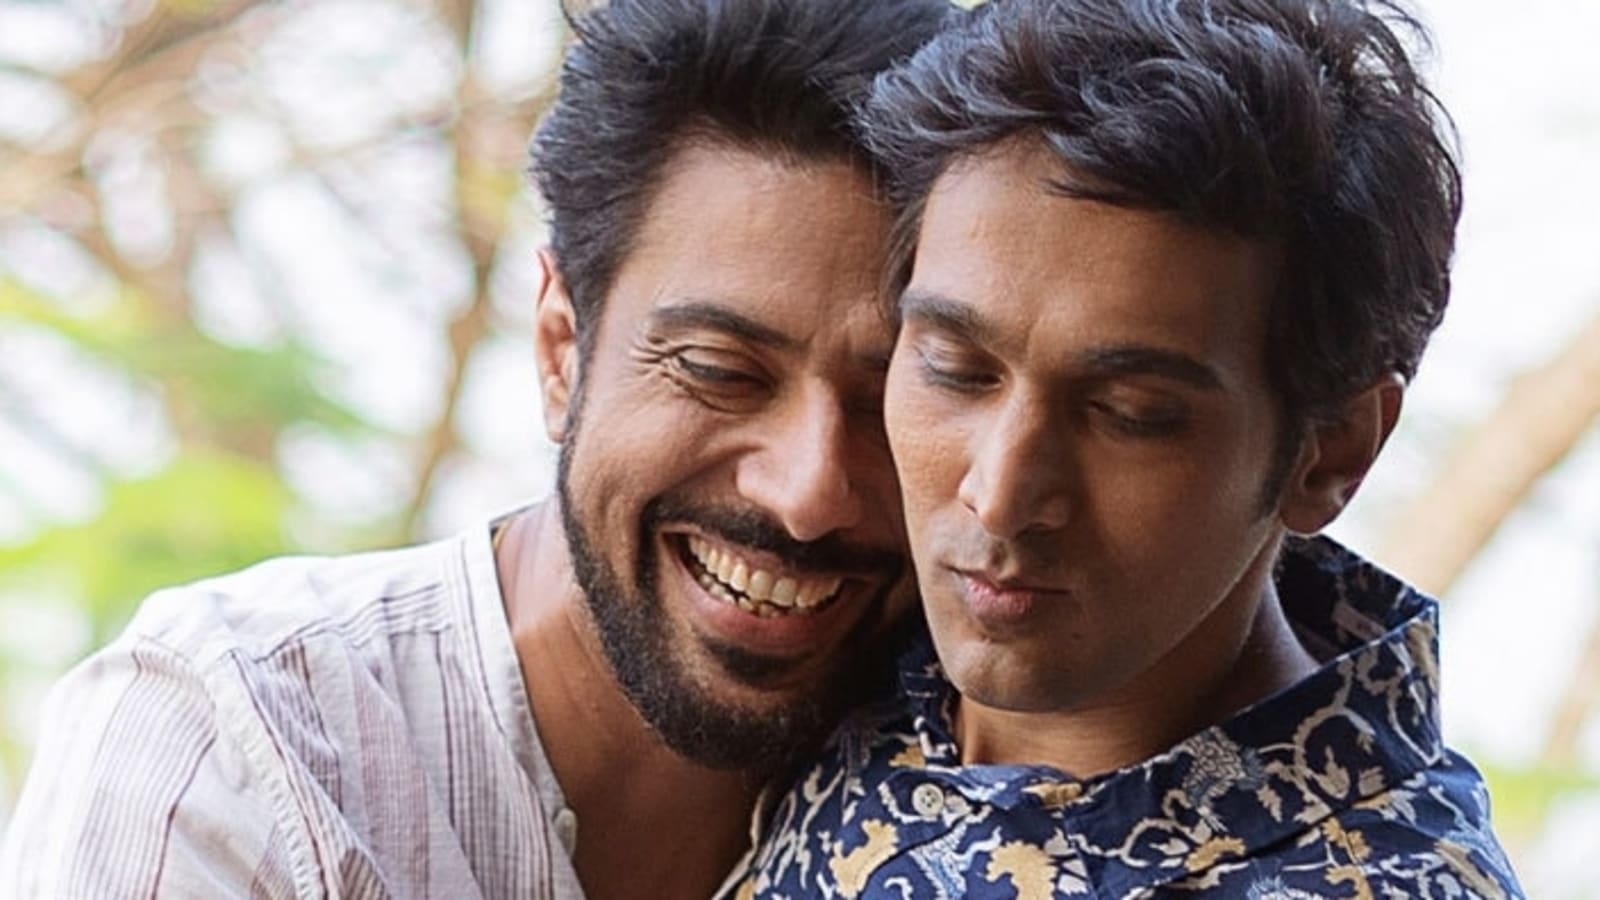 Modern Love Mumbai episode on gay love missing from Amazon Prime Video in UAE Web Series